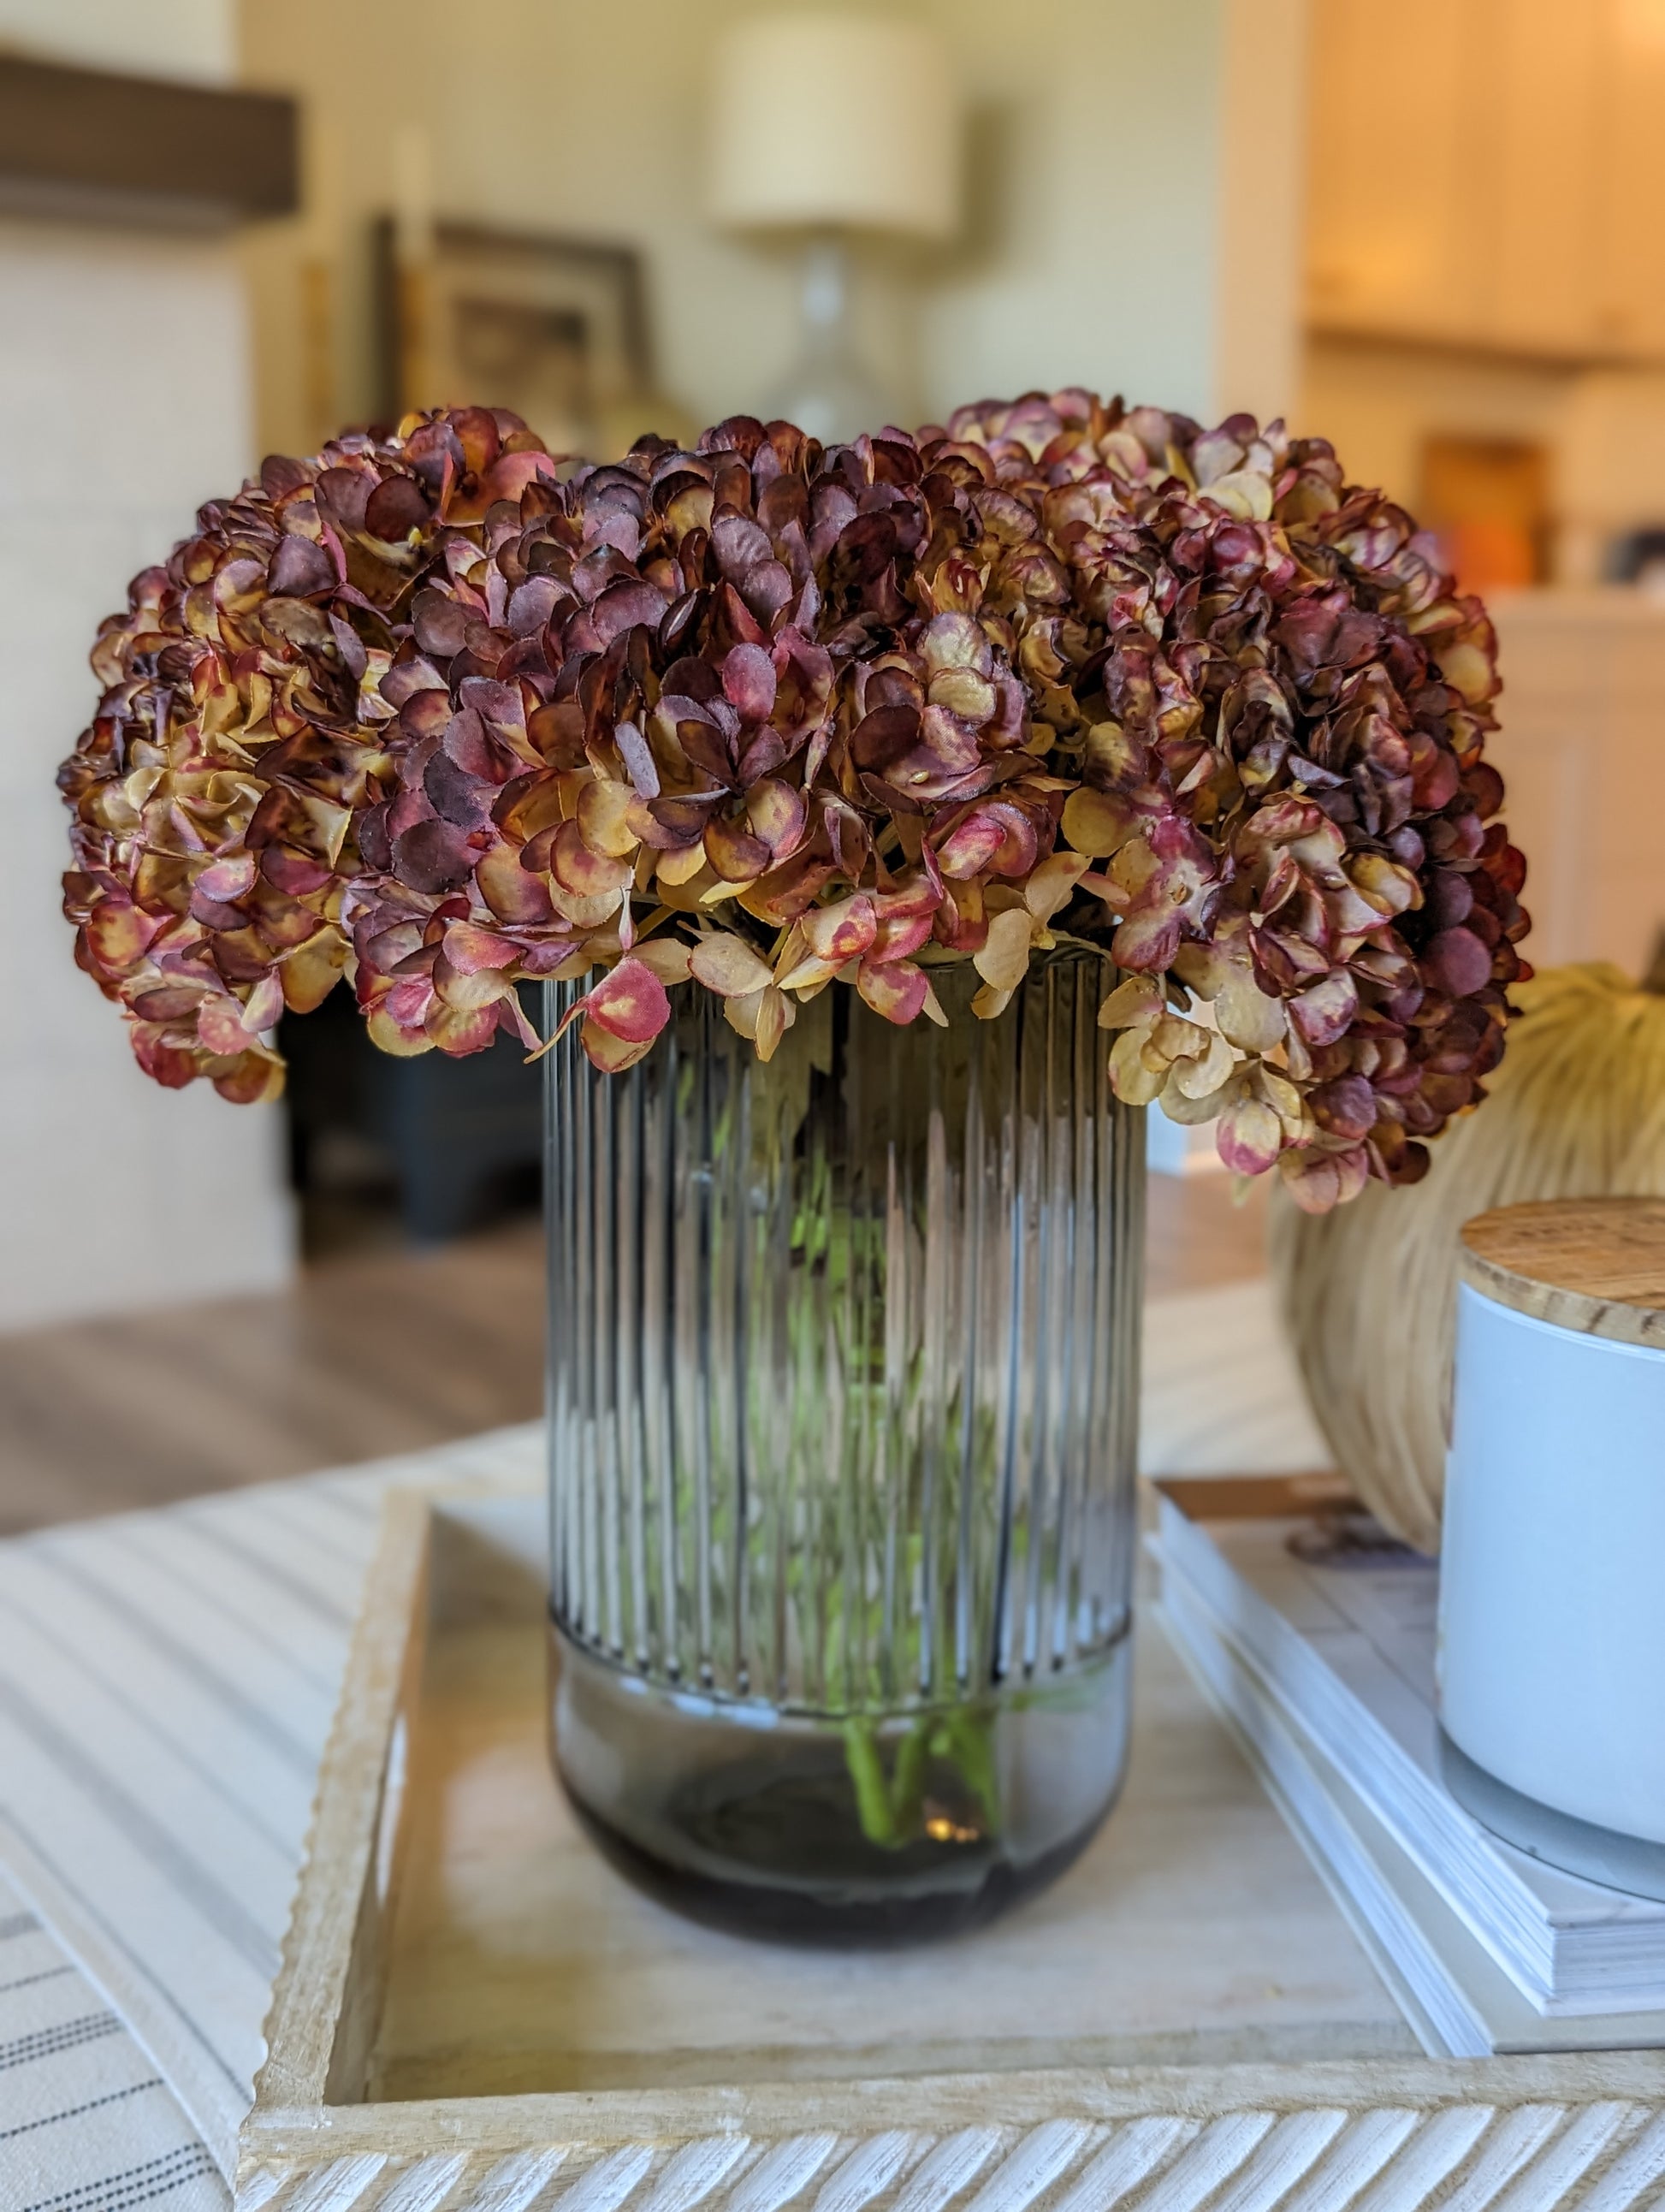 Artificial Dried Look Fall Hydrangea - 19 inches